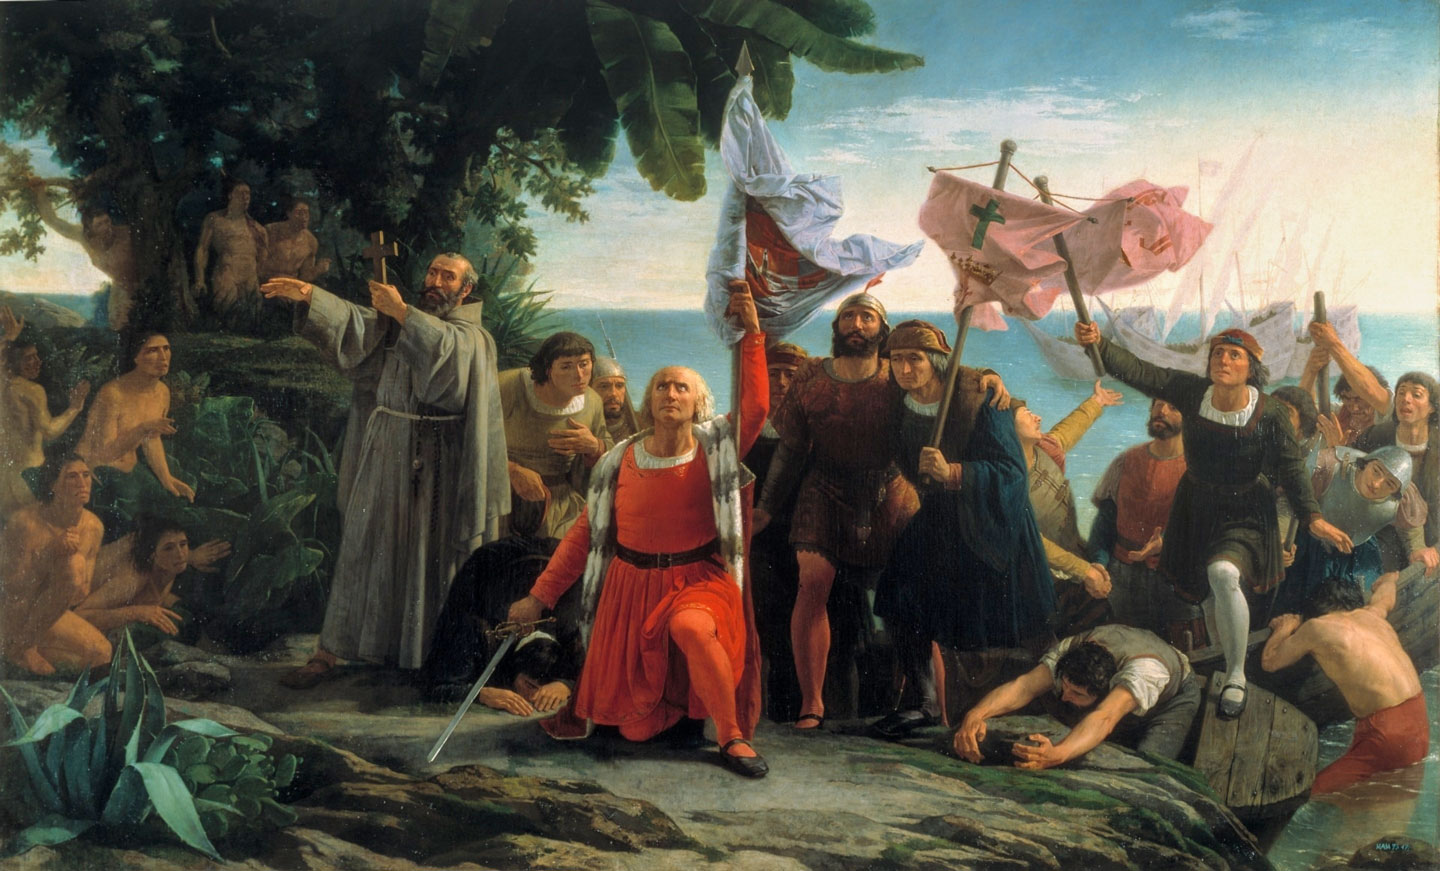 Columbus with sword and flag conquering the New World.